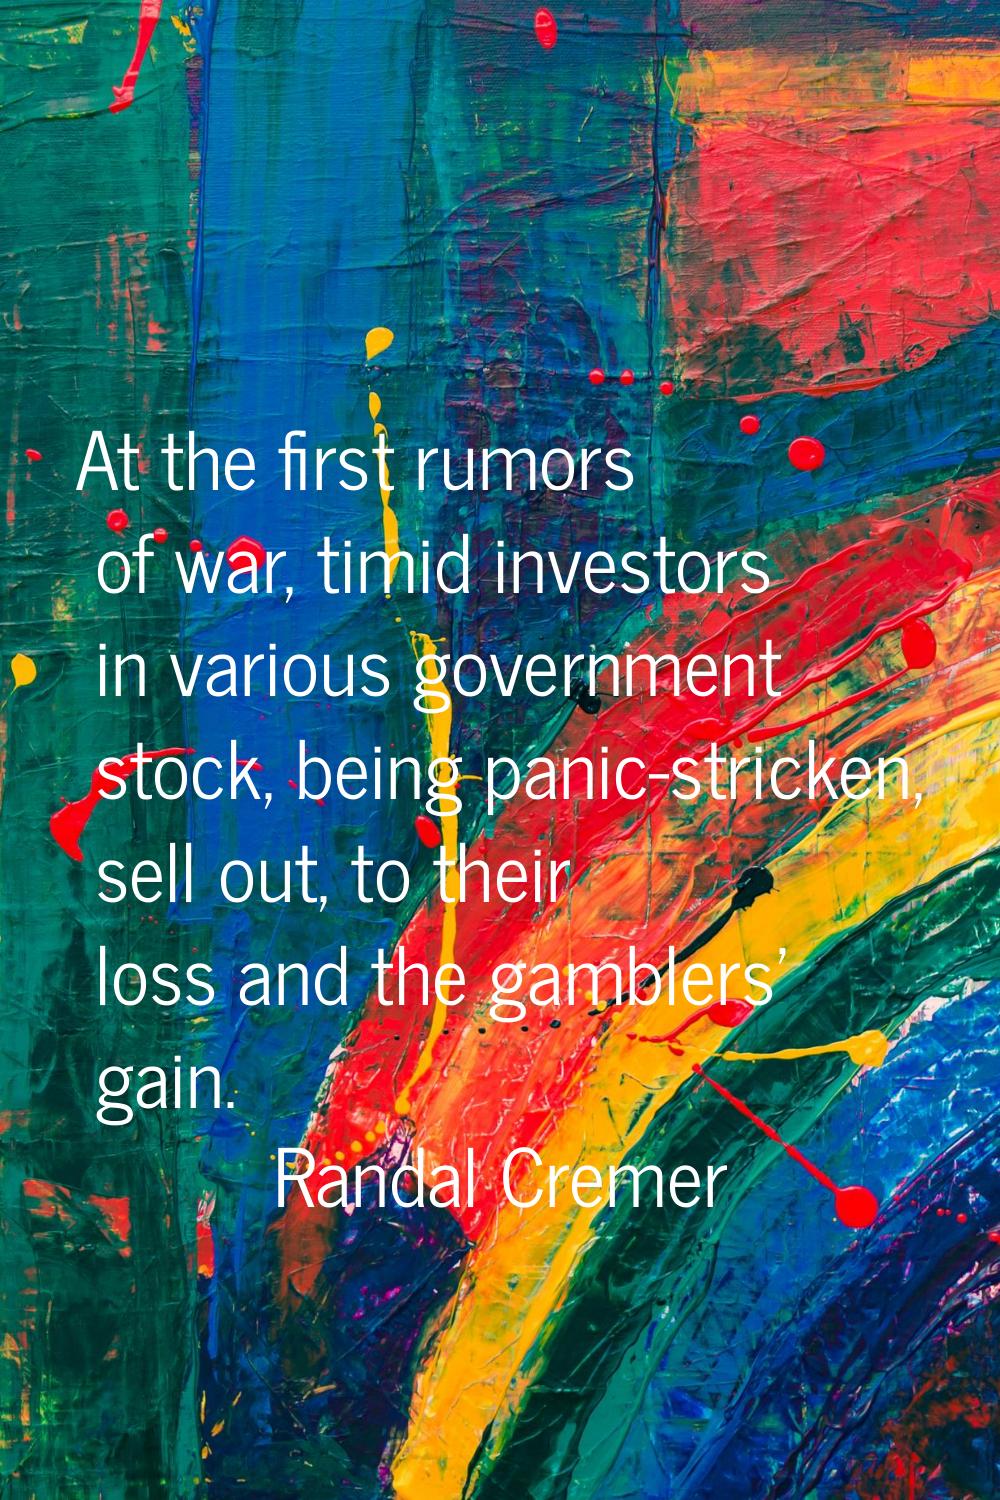 At the first rumors of war, timid investors in various government stock, being panic-stricken, sell